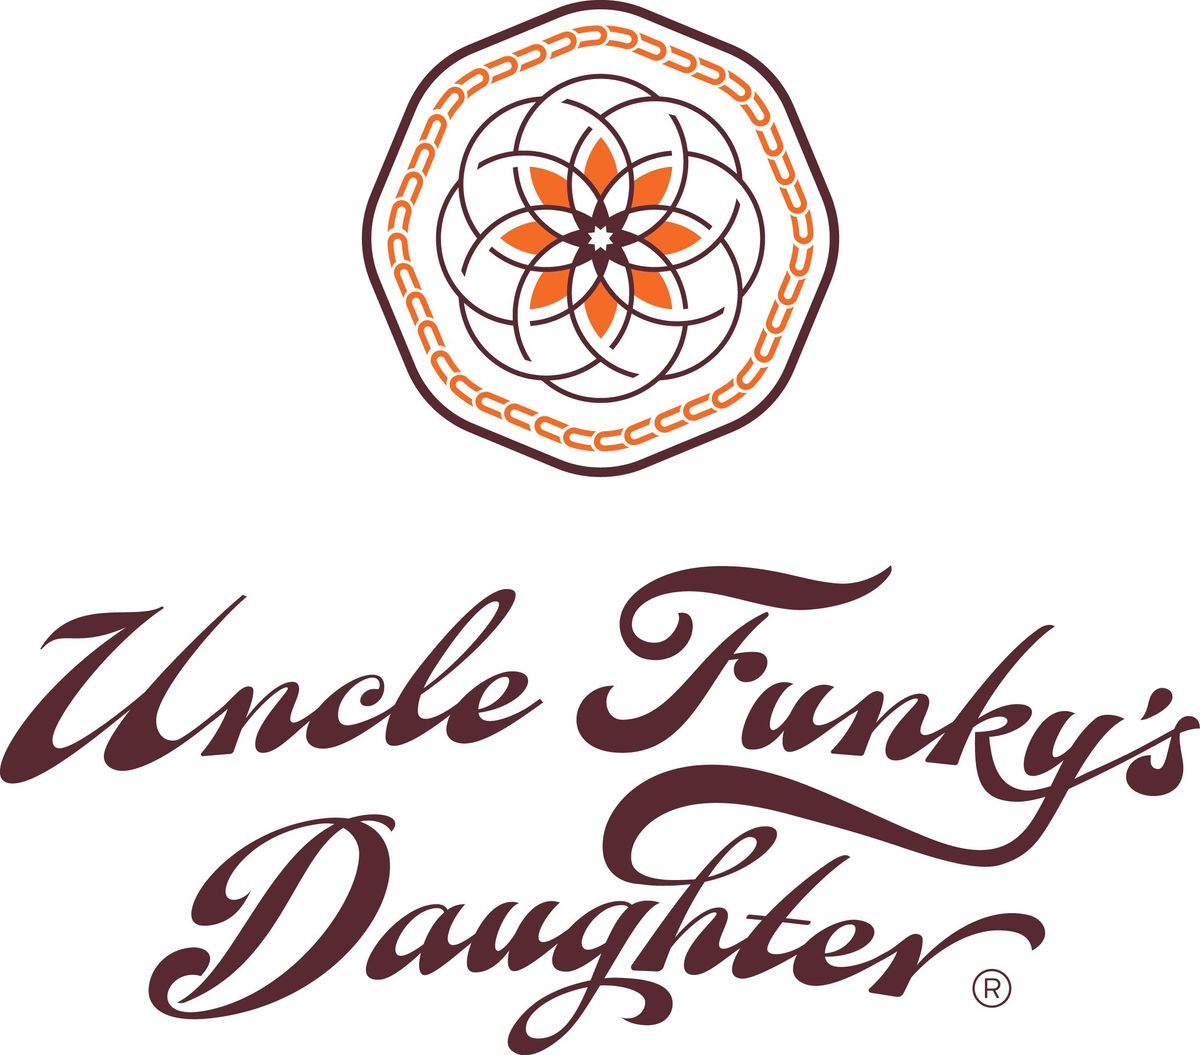 Uncle Funky's Daughter expands distribution in U.S. stores following NIL deal with NCAA Women's champion